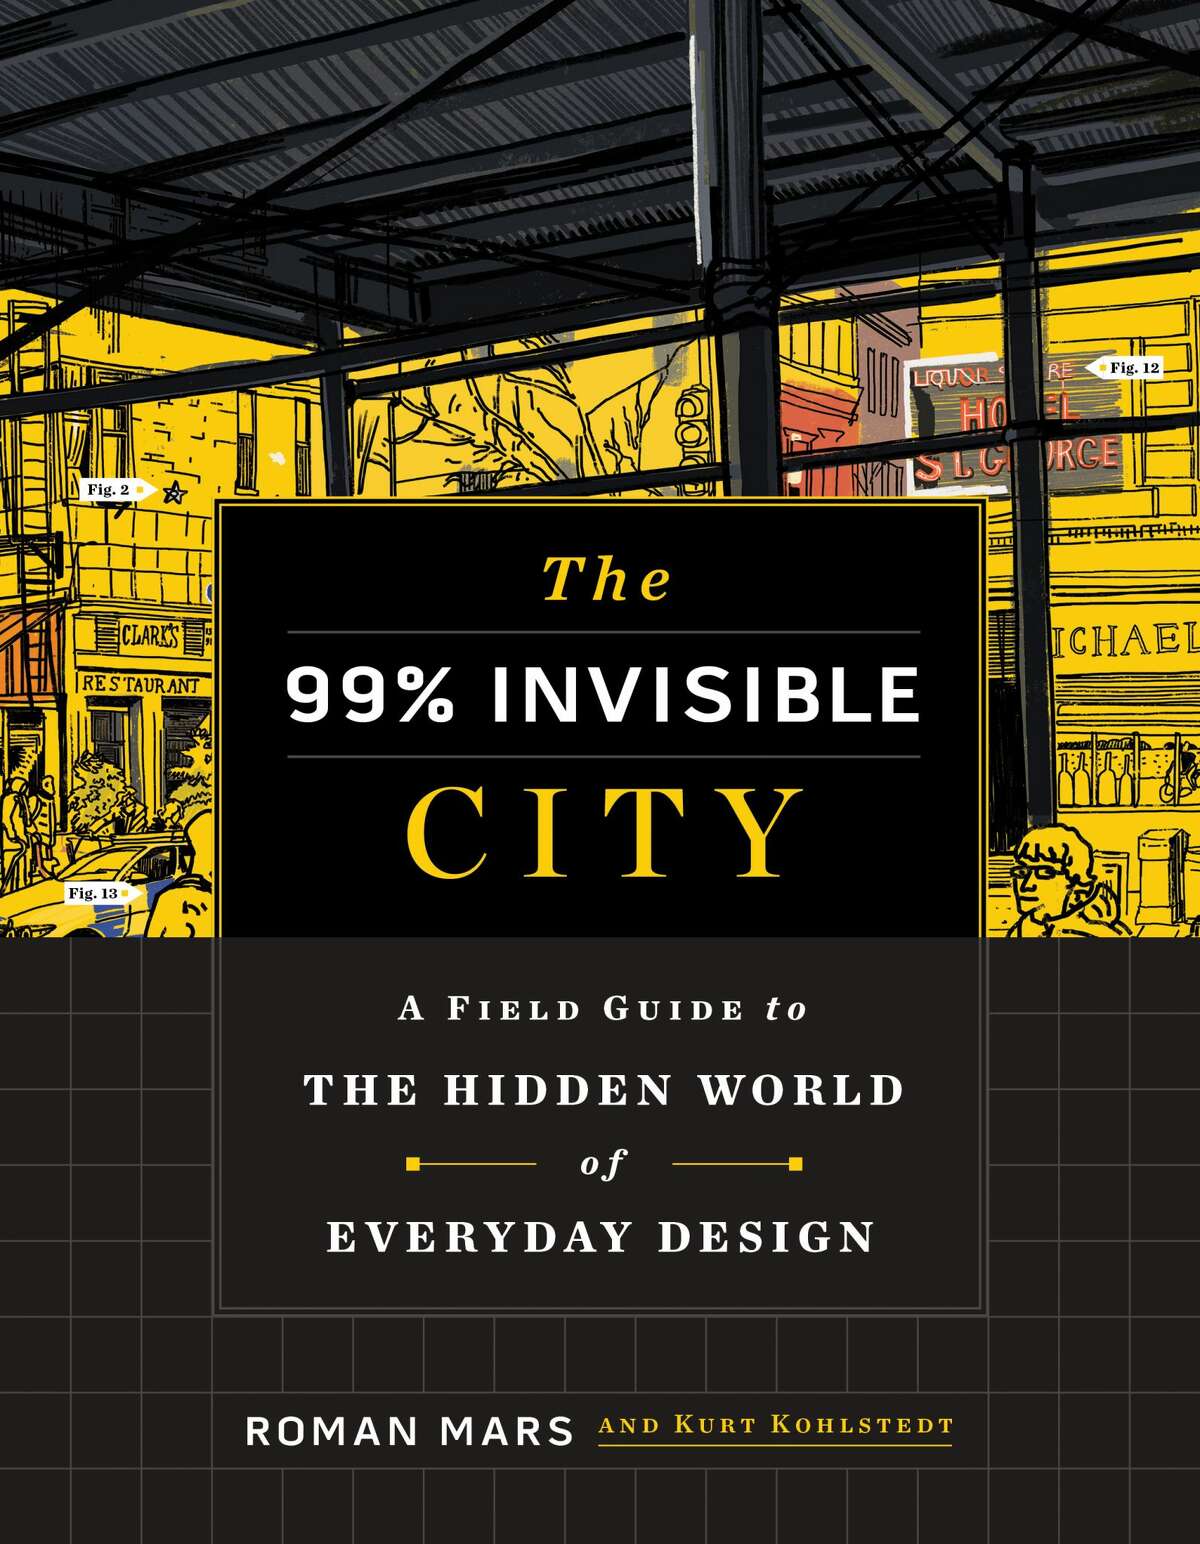 Roman Mars is the co-author of The 99% Invisible City: A Field Guide to the Hidden World of Everyday Design.